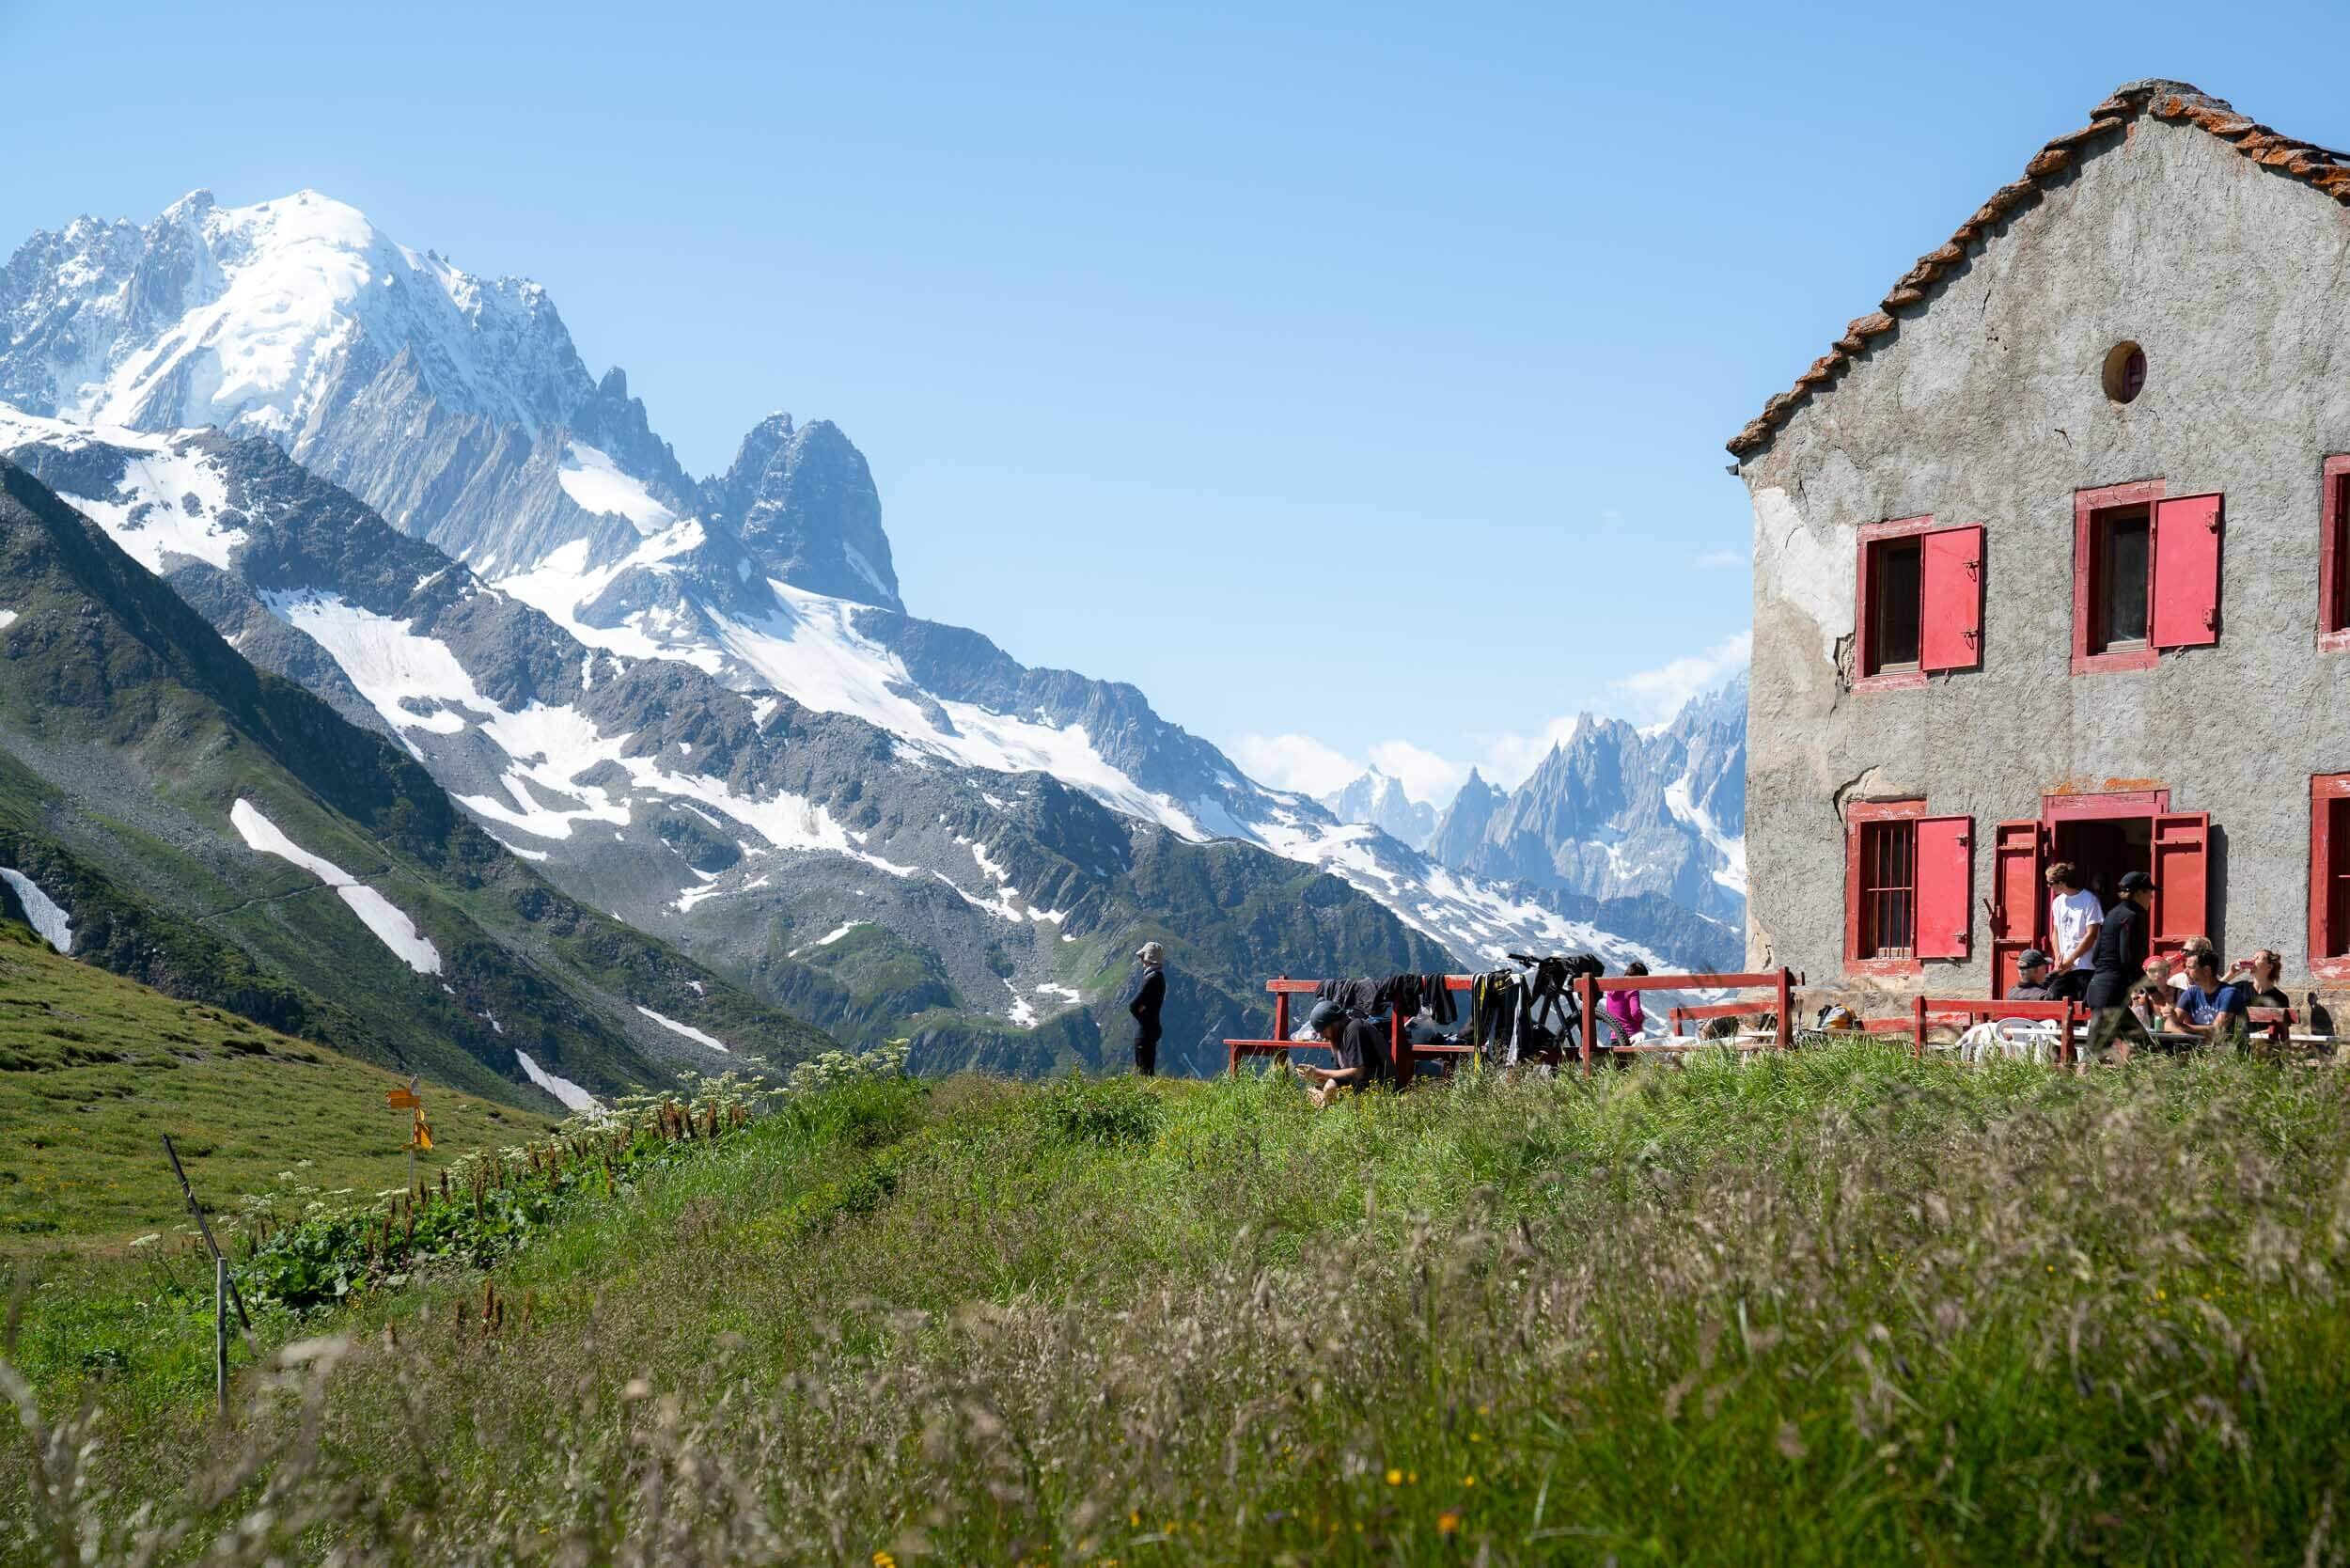 Stopping for lunch at a refugio along the Tour du Mont Blanc.